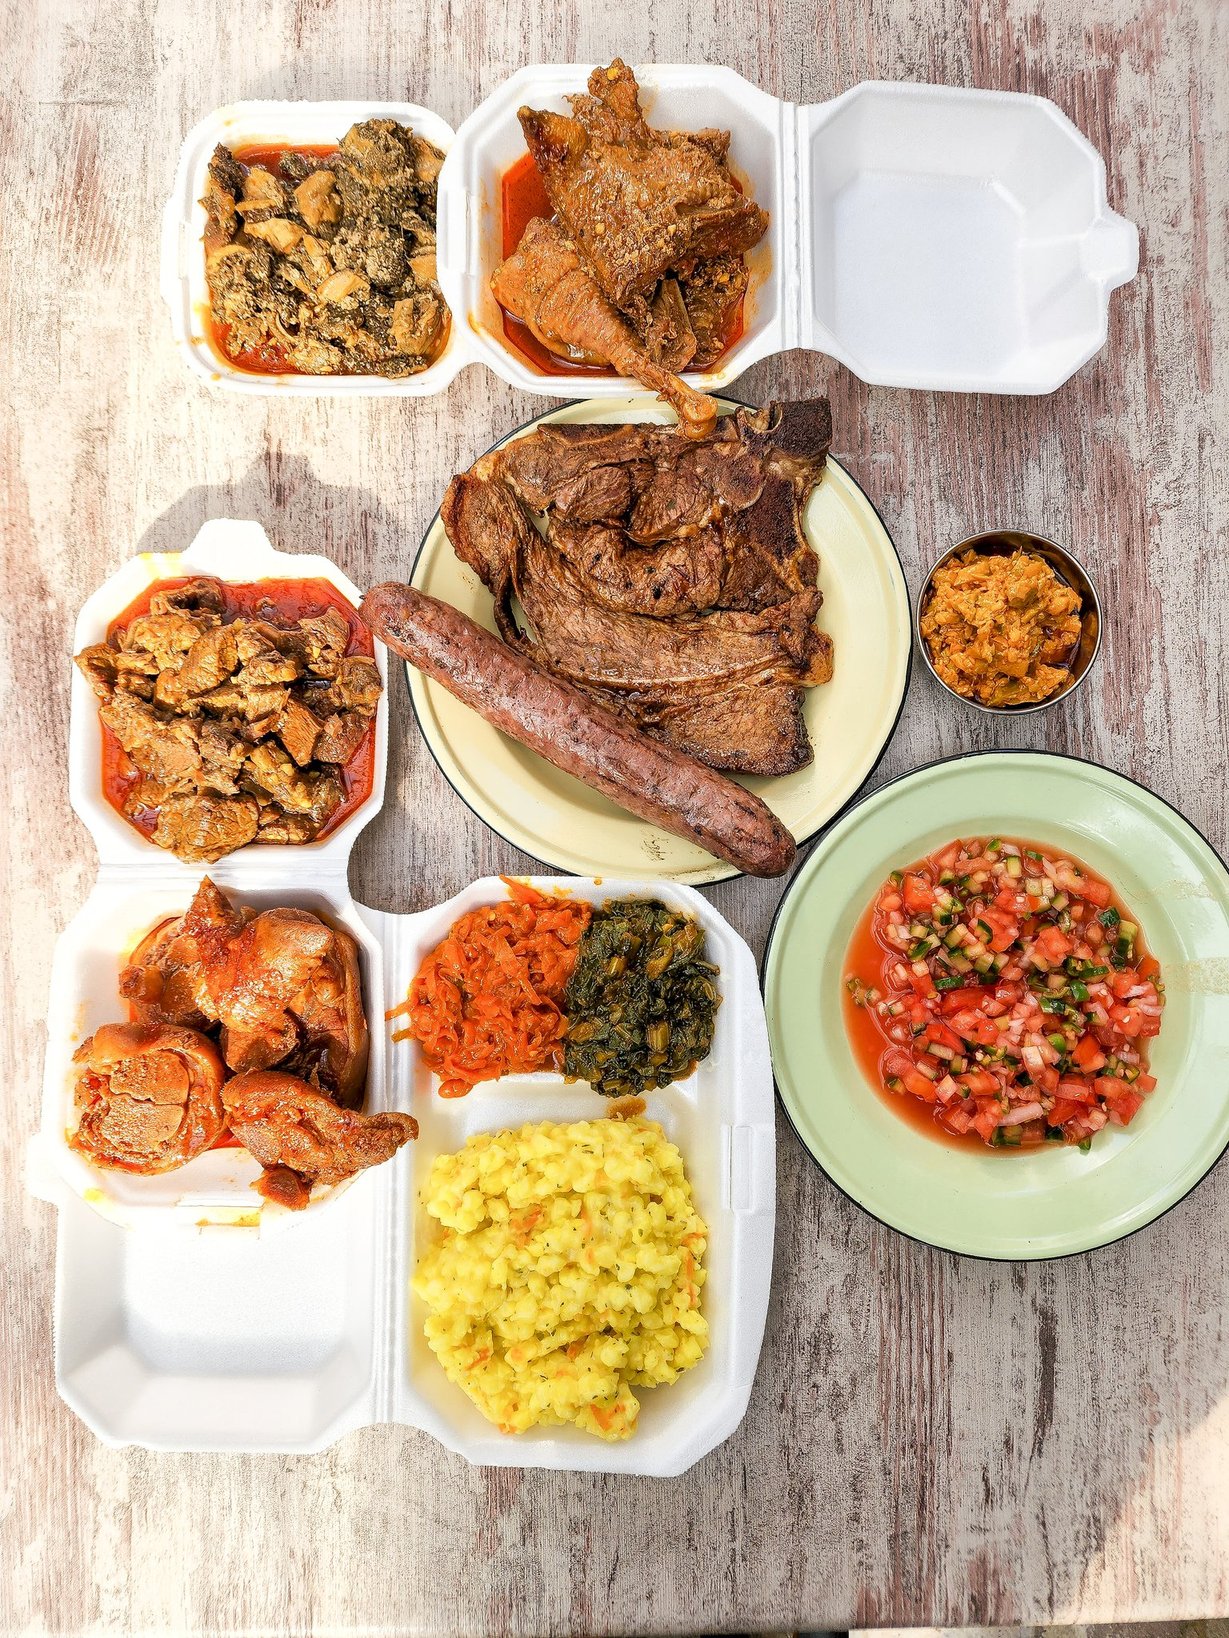 Delicious Mzansi Food On Twitter Now On Uber From 10 Am We Start